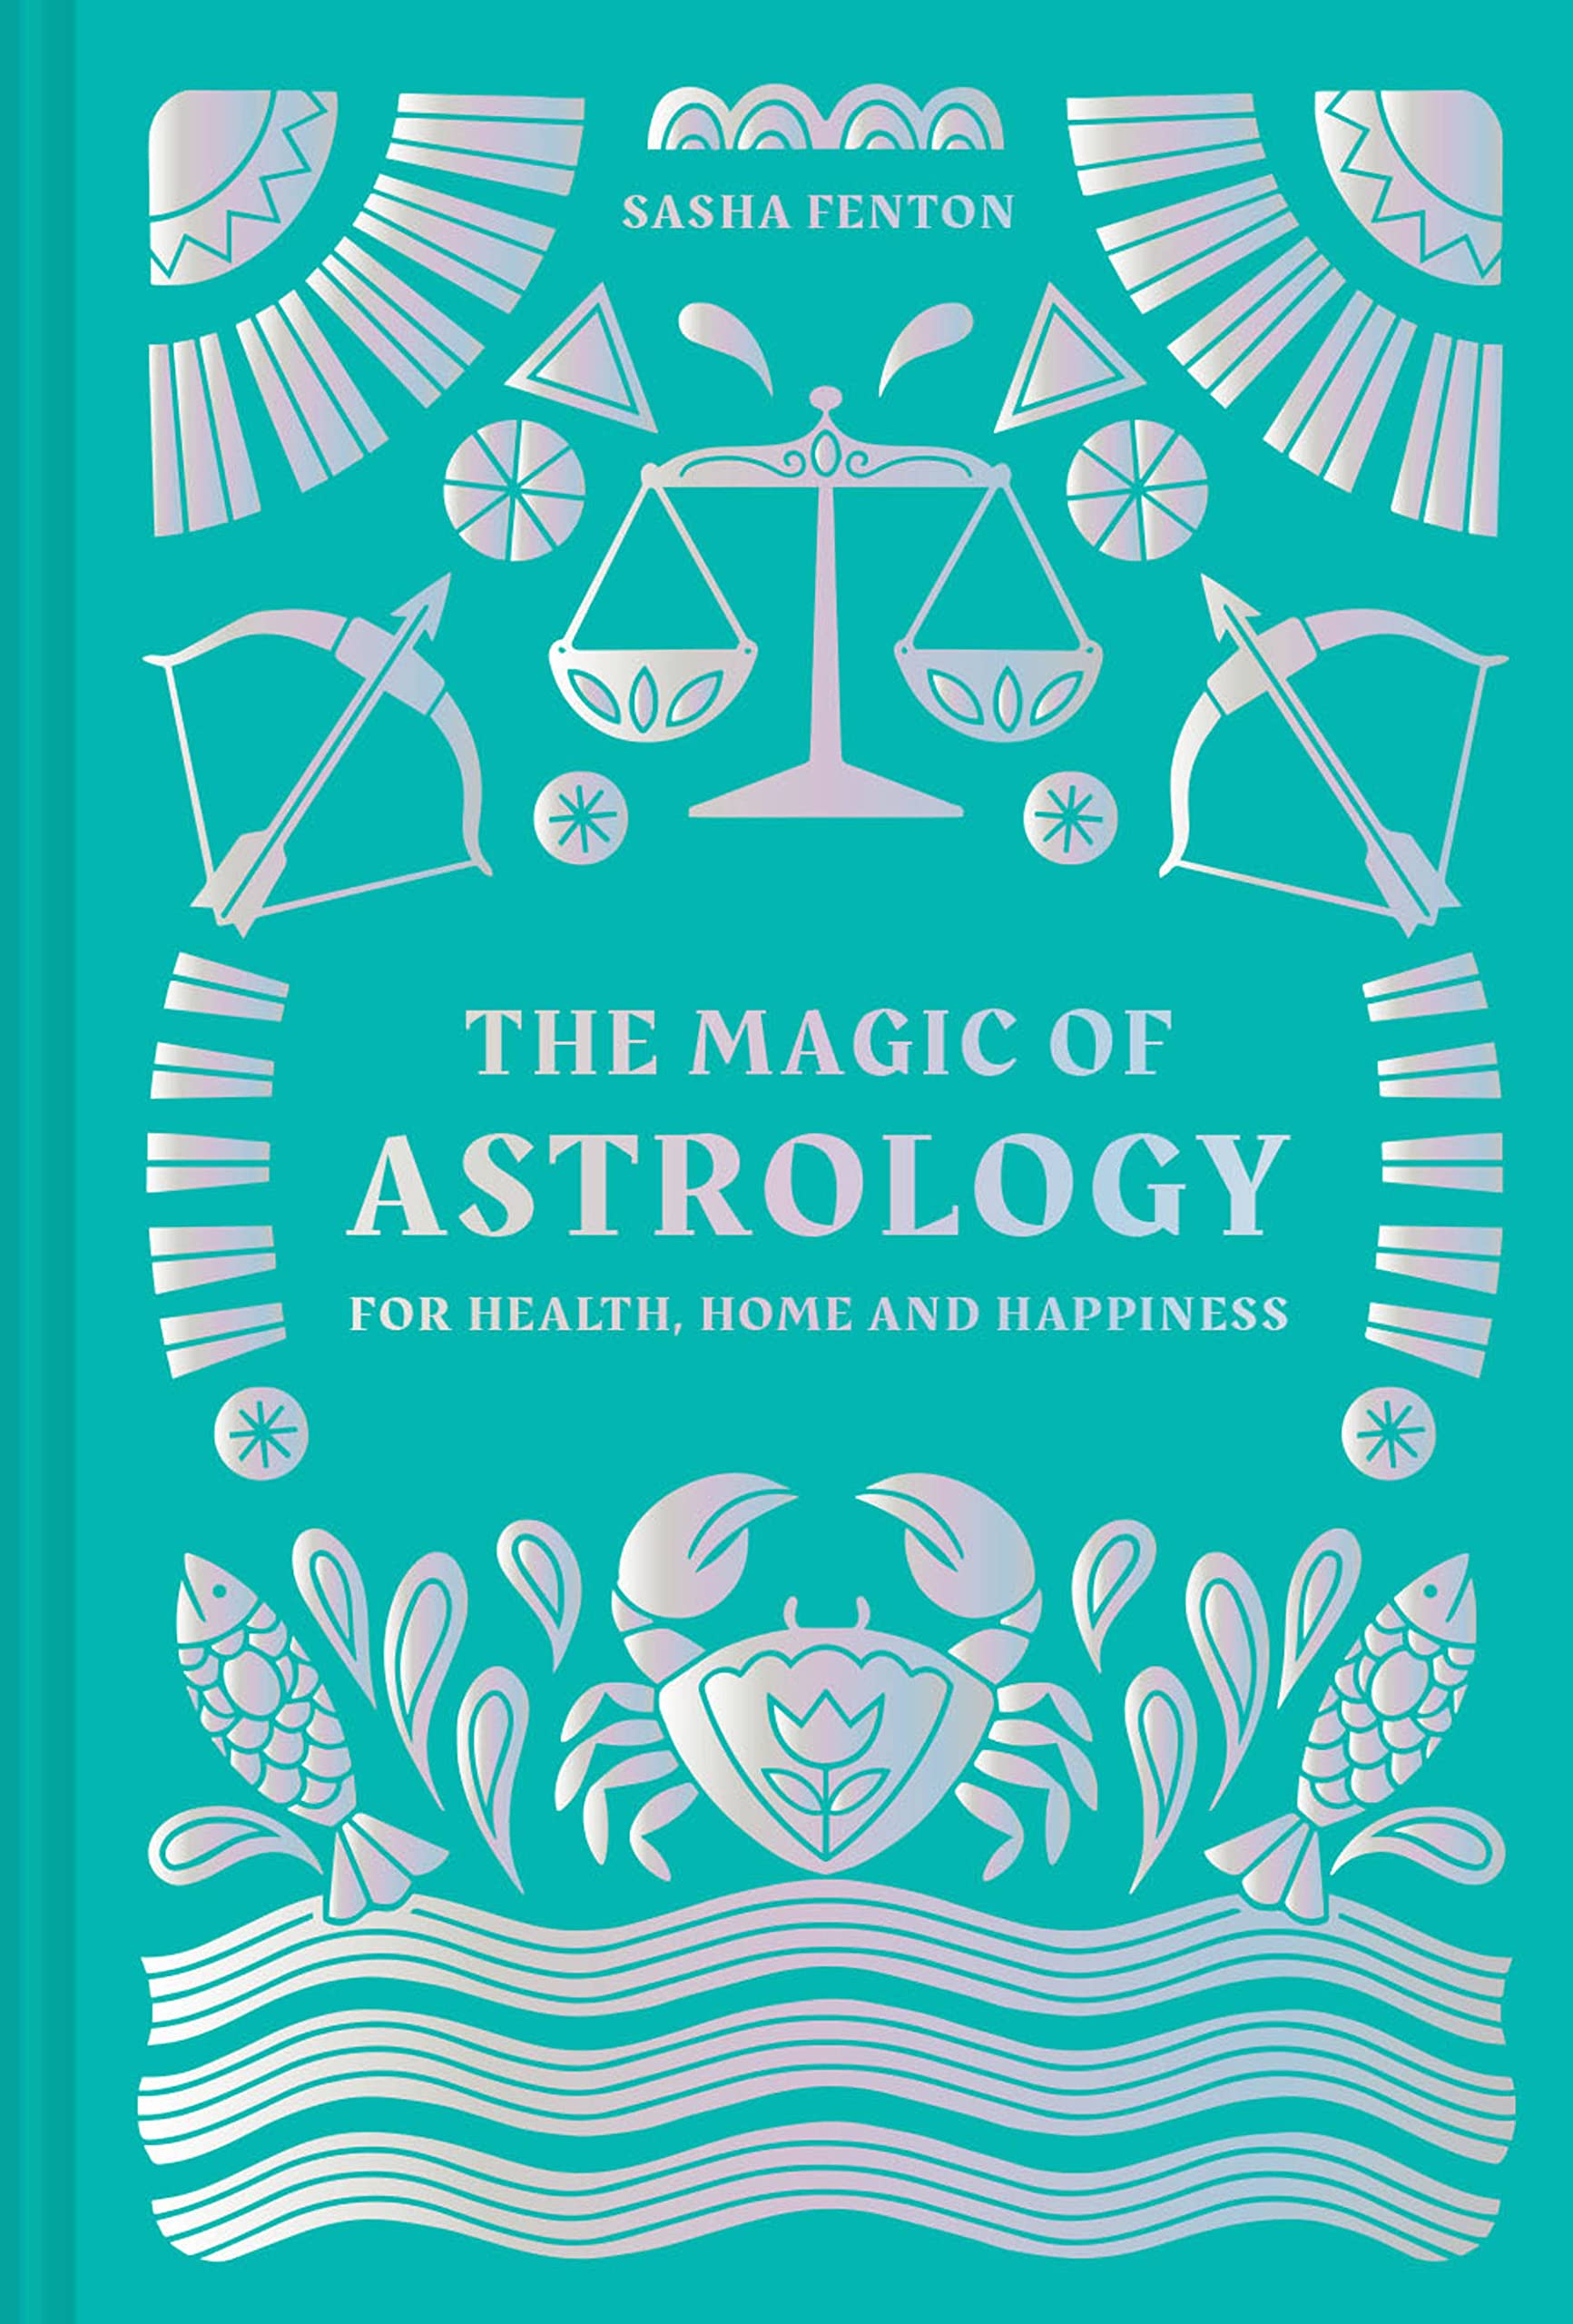 The Magic of Astrology: For Health, Home and Happiness